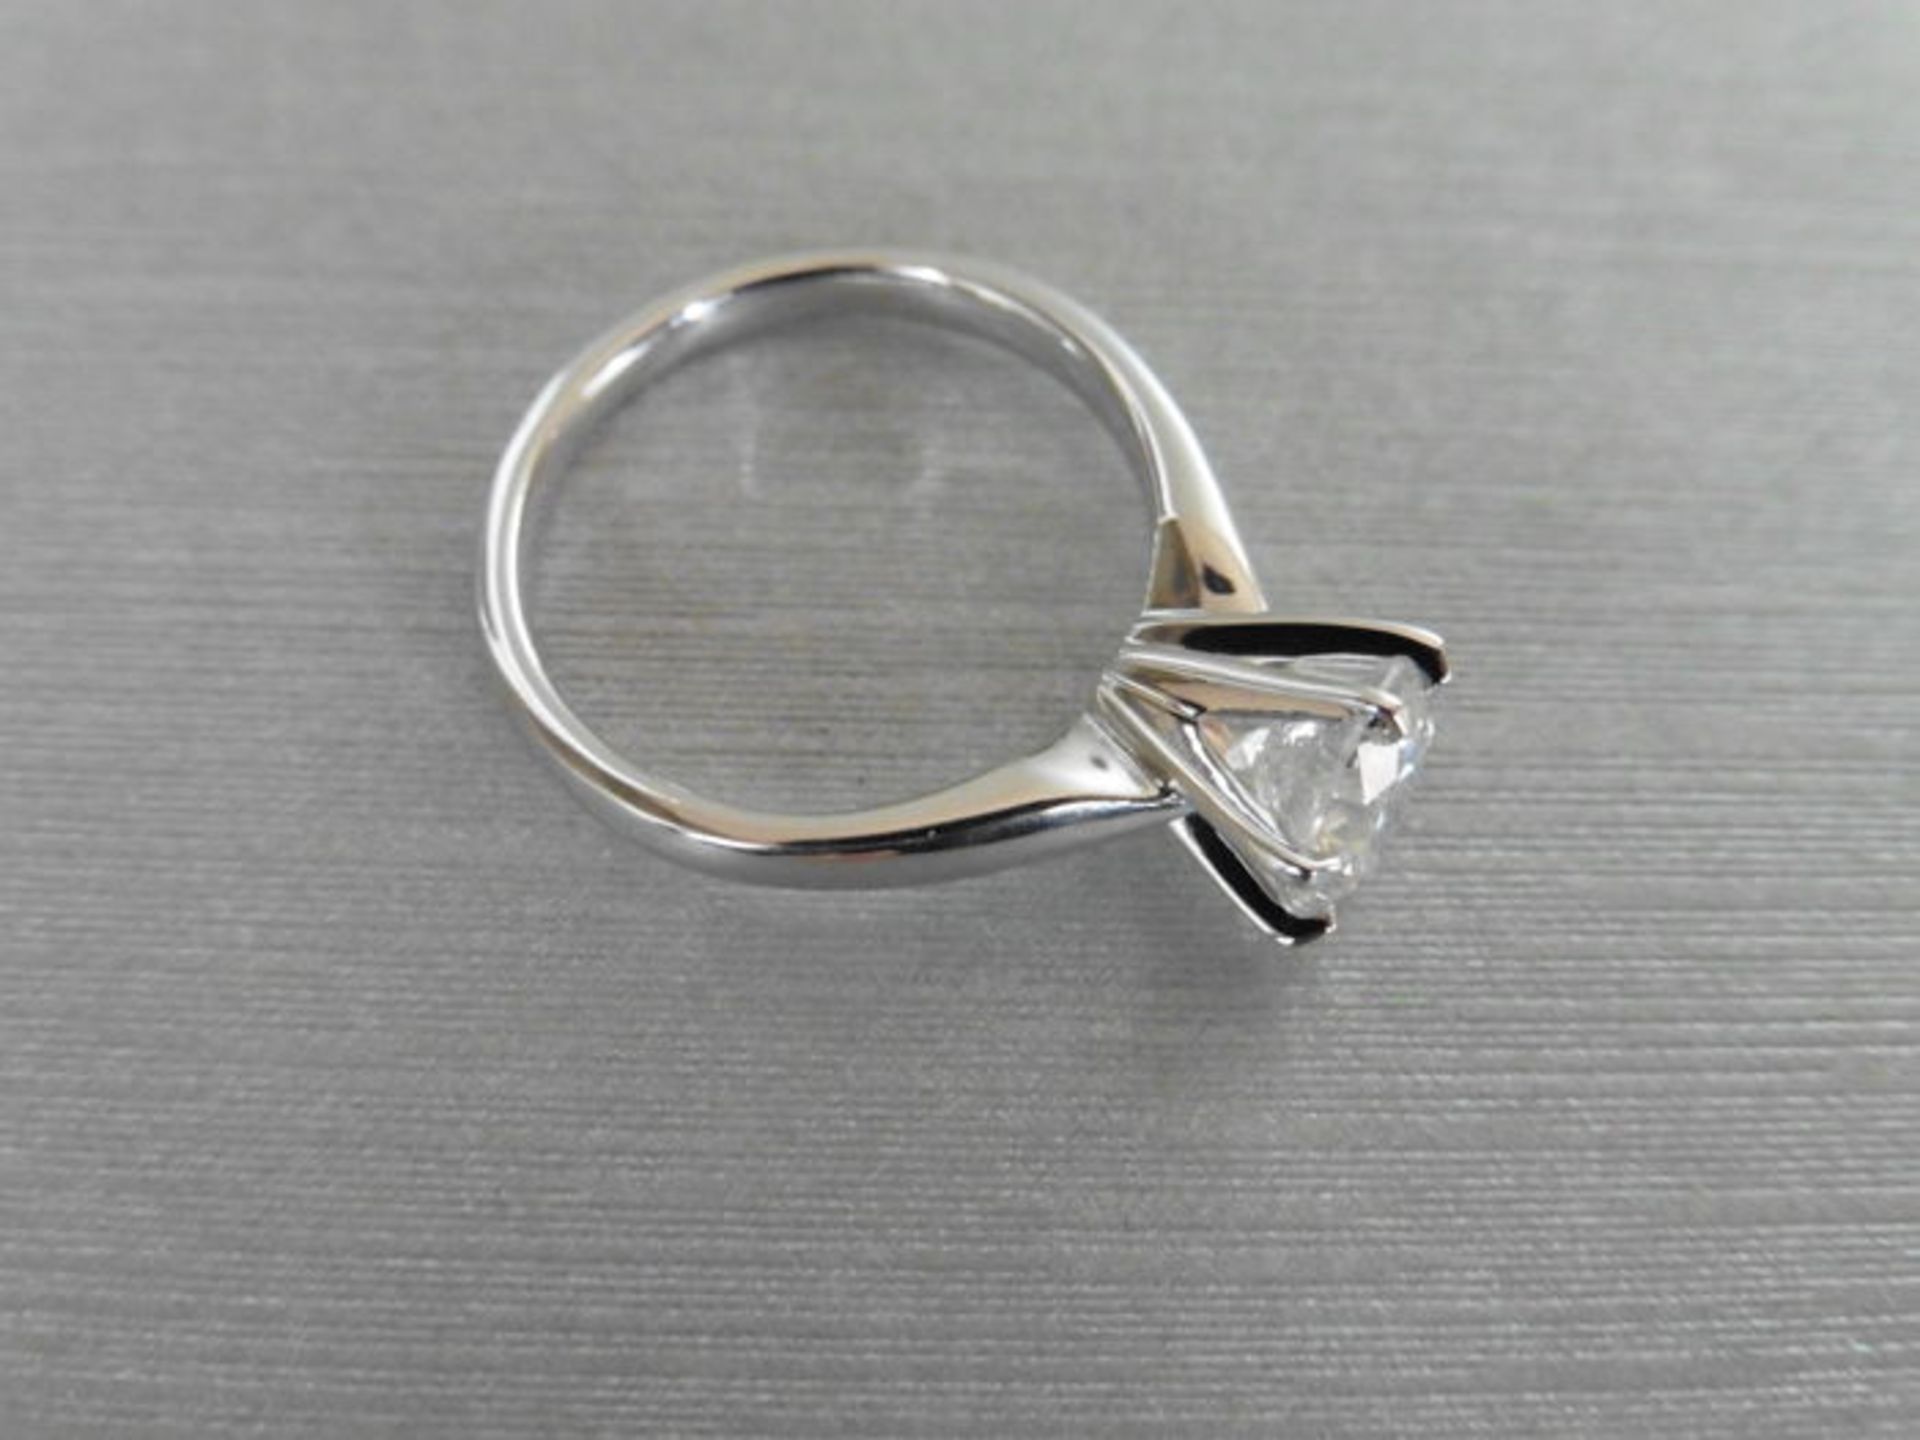 1.05ct Diamond solitaire ring with a brilliant cut diamond, H colour and Si1 clarity. Set in - Image 2 of 4